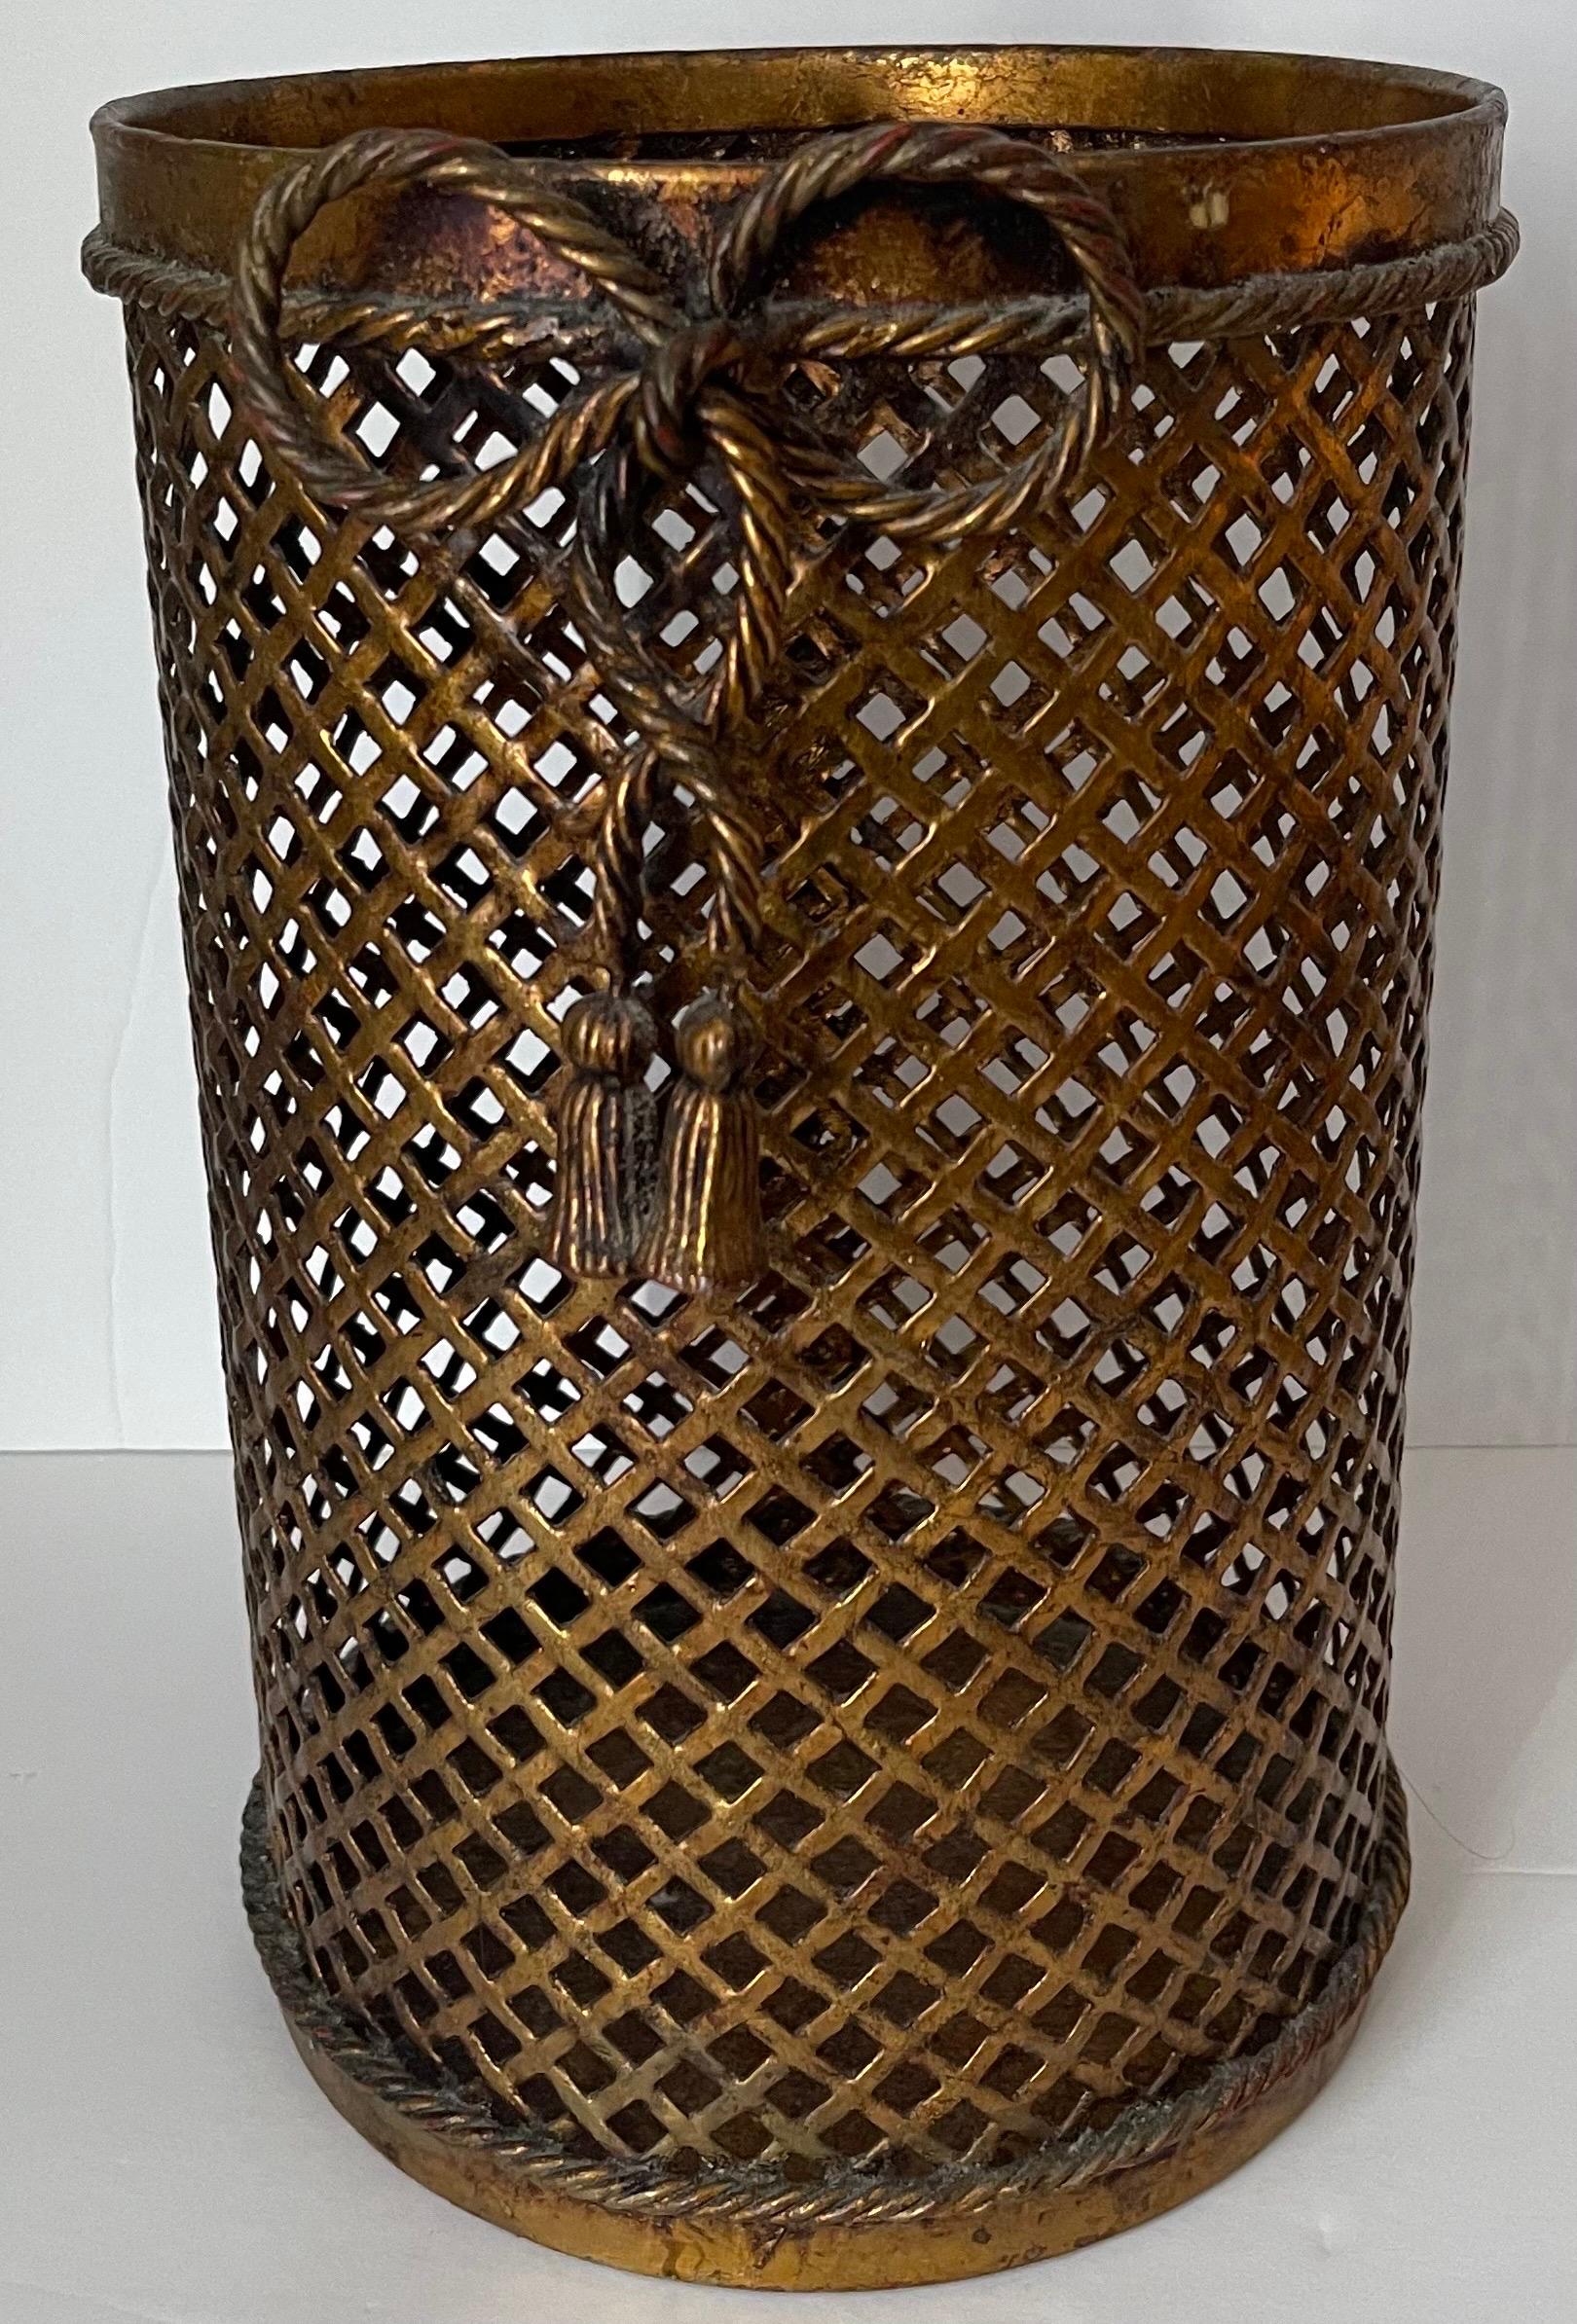 Italian gilt metal wastepaper basket. Rope trim and center rope bow with tassel accent. Signed Made in Italy in the underside.